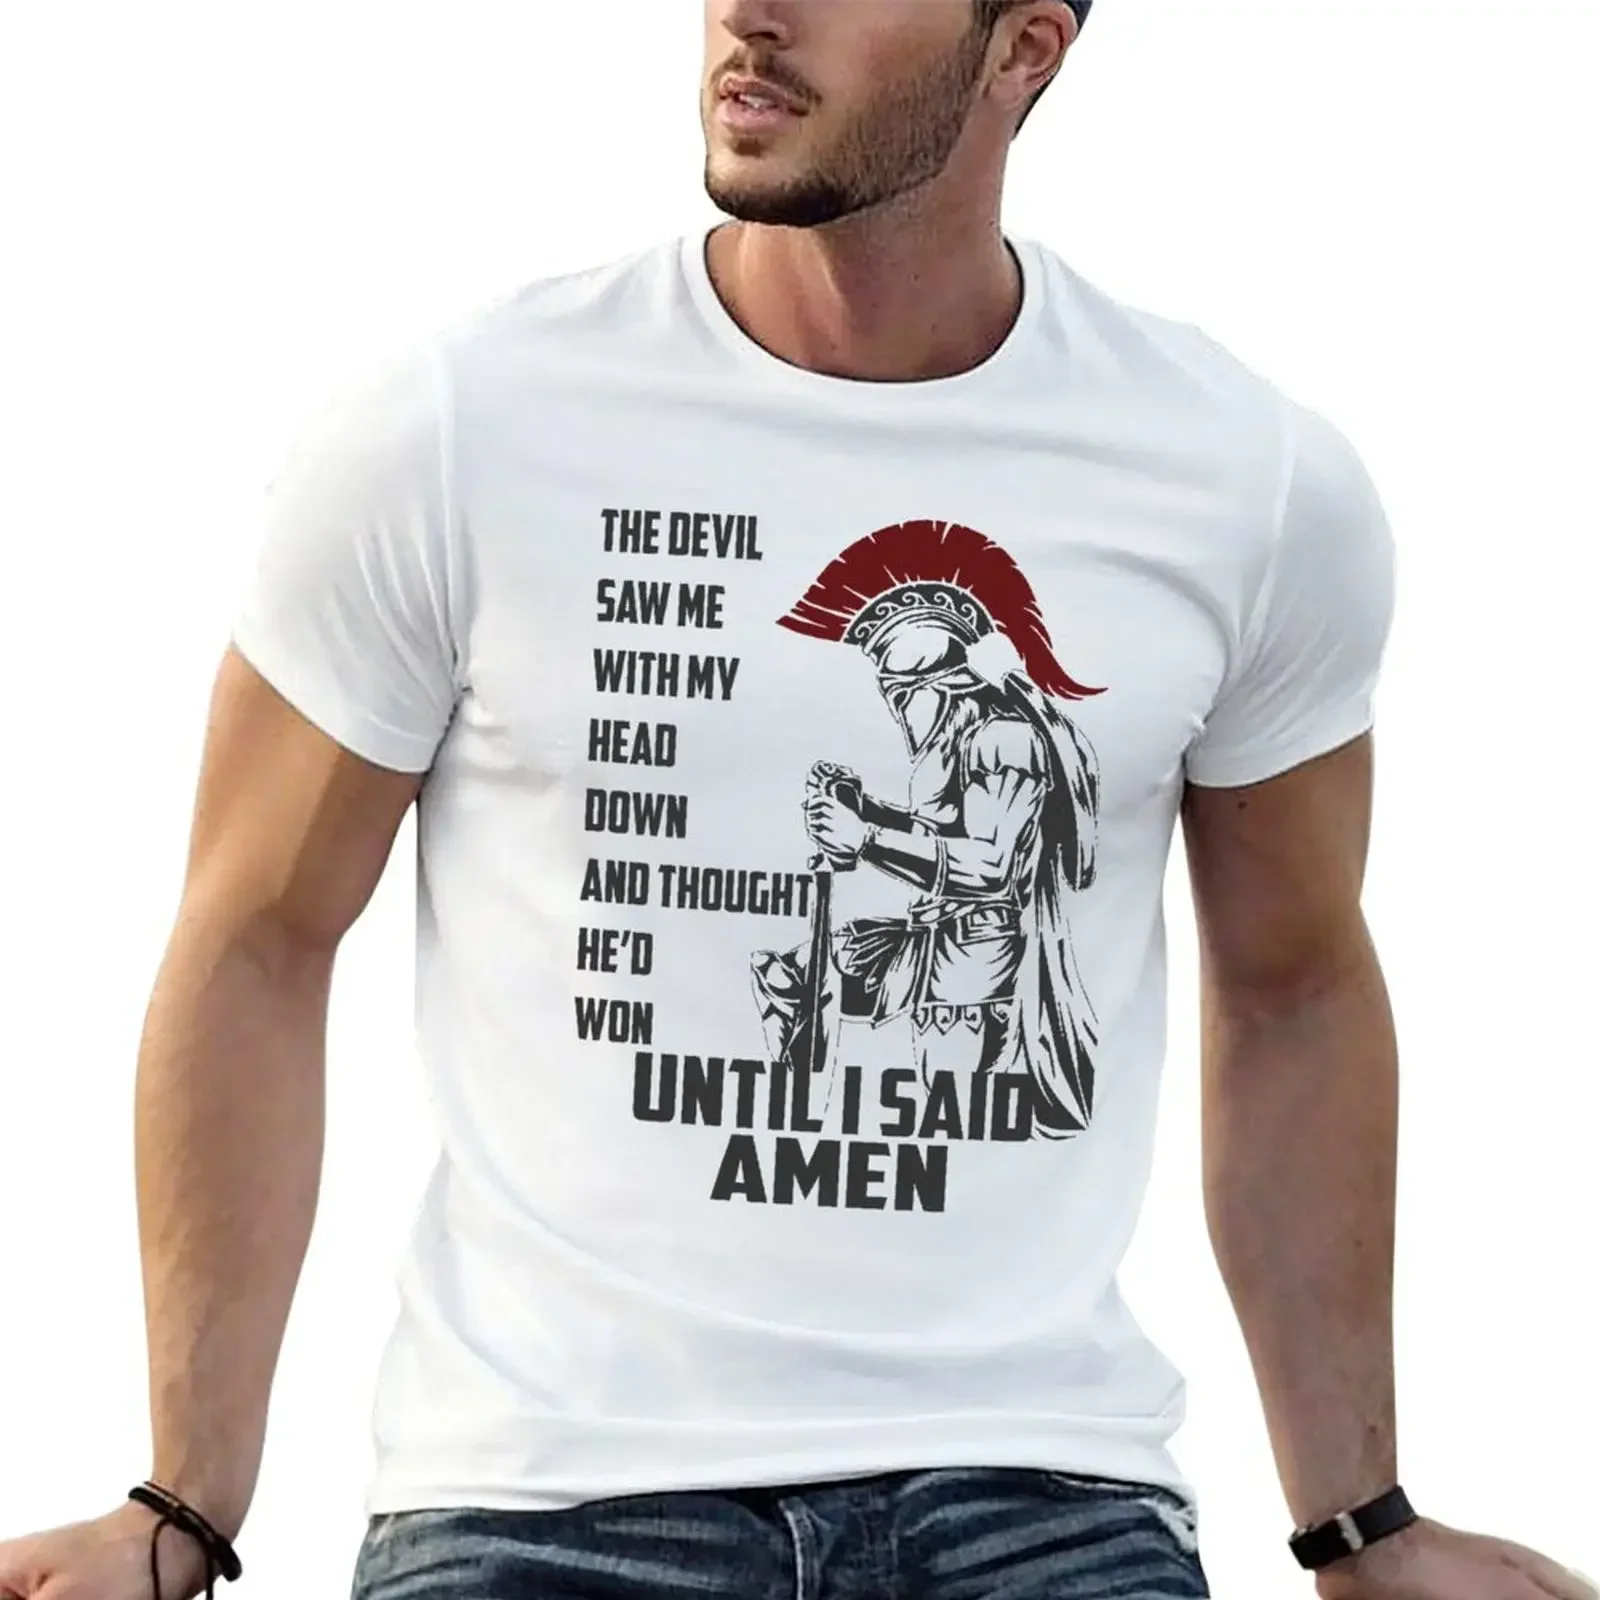 

The devil saw me with my head down and thought he'd won until i said amen T-shirt Short sleeve tee blanks Men's clothing